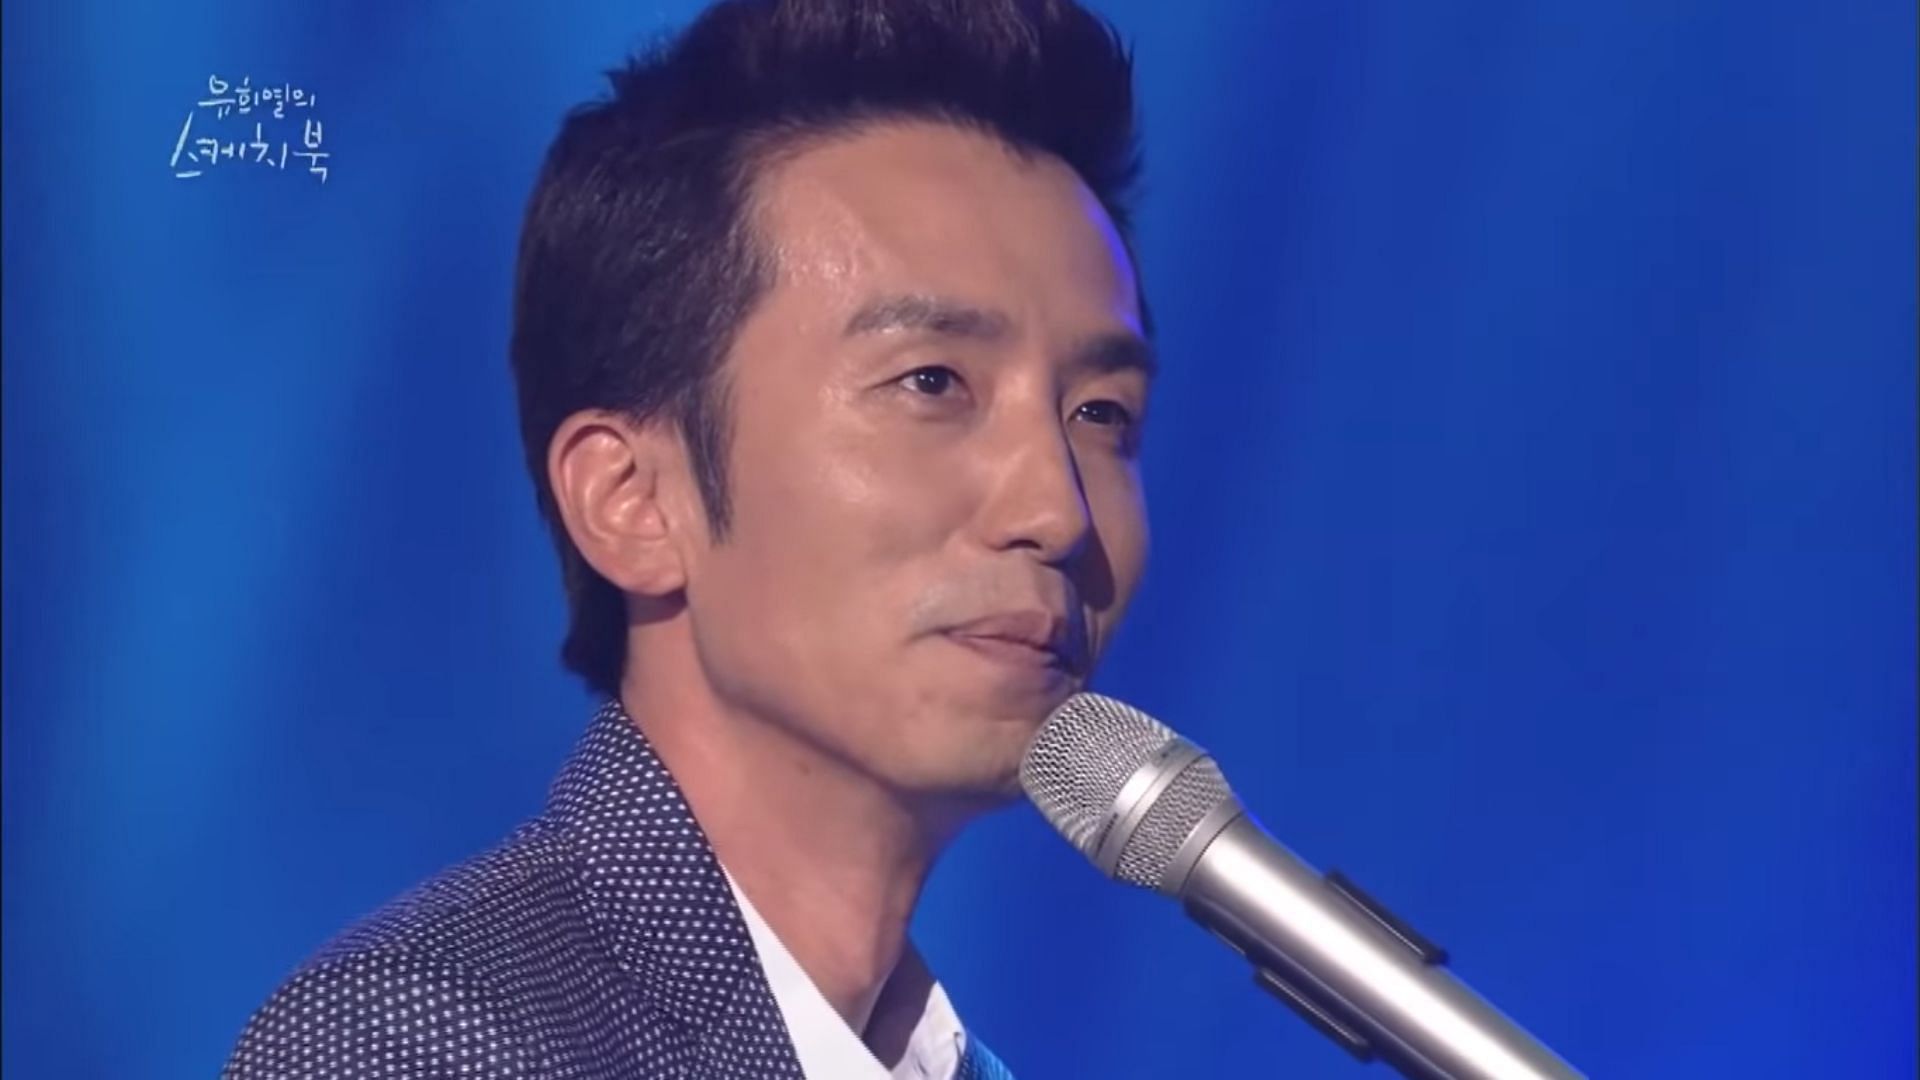 Yoo Hee-yeol&rsquo;s Sketchbook wraps up after 13 years (Image via YouTube/KBS World TV)